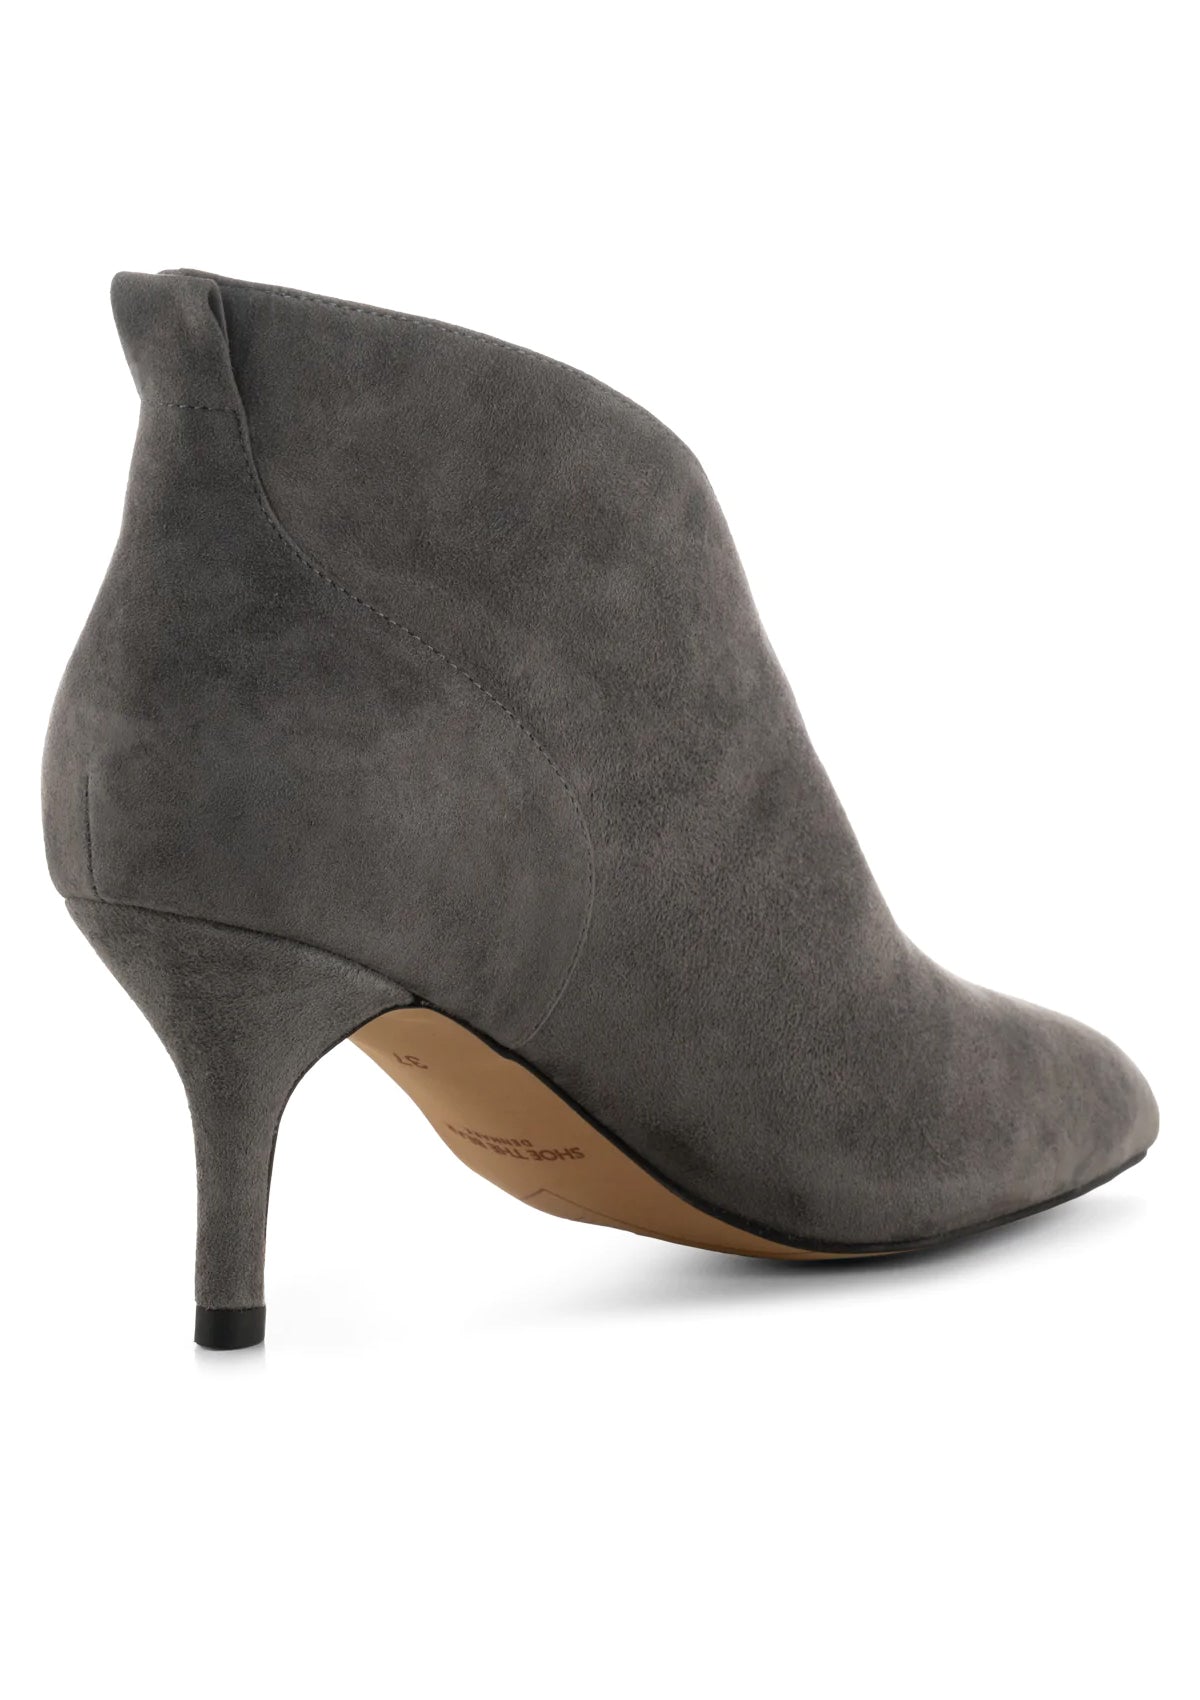 Shoe The Bear Valentine Shoe Boot Grey Suede